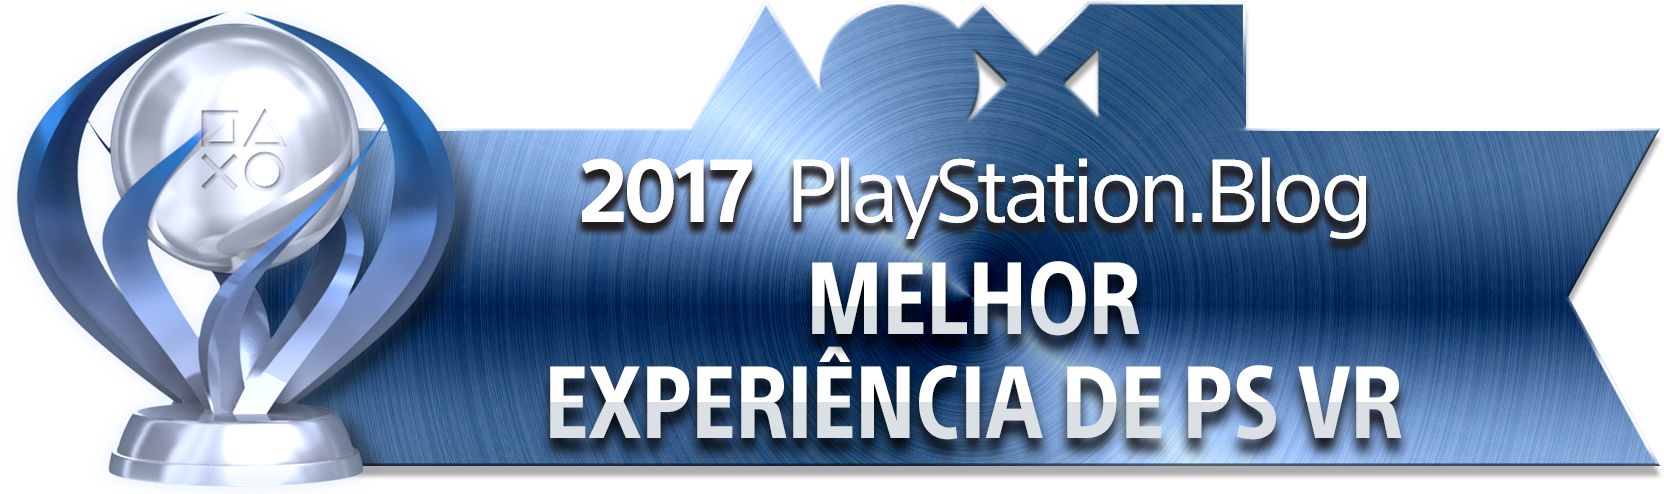 PlayStation Blog Game of the Year 2017 - Best PS VR Experience (Platinum)